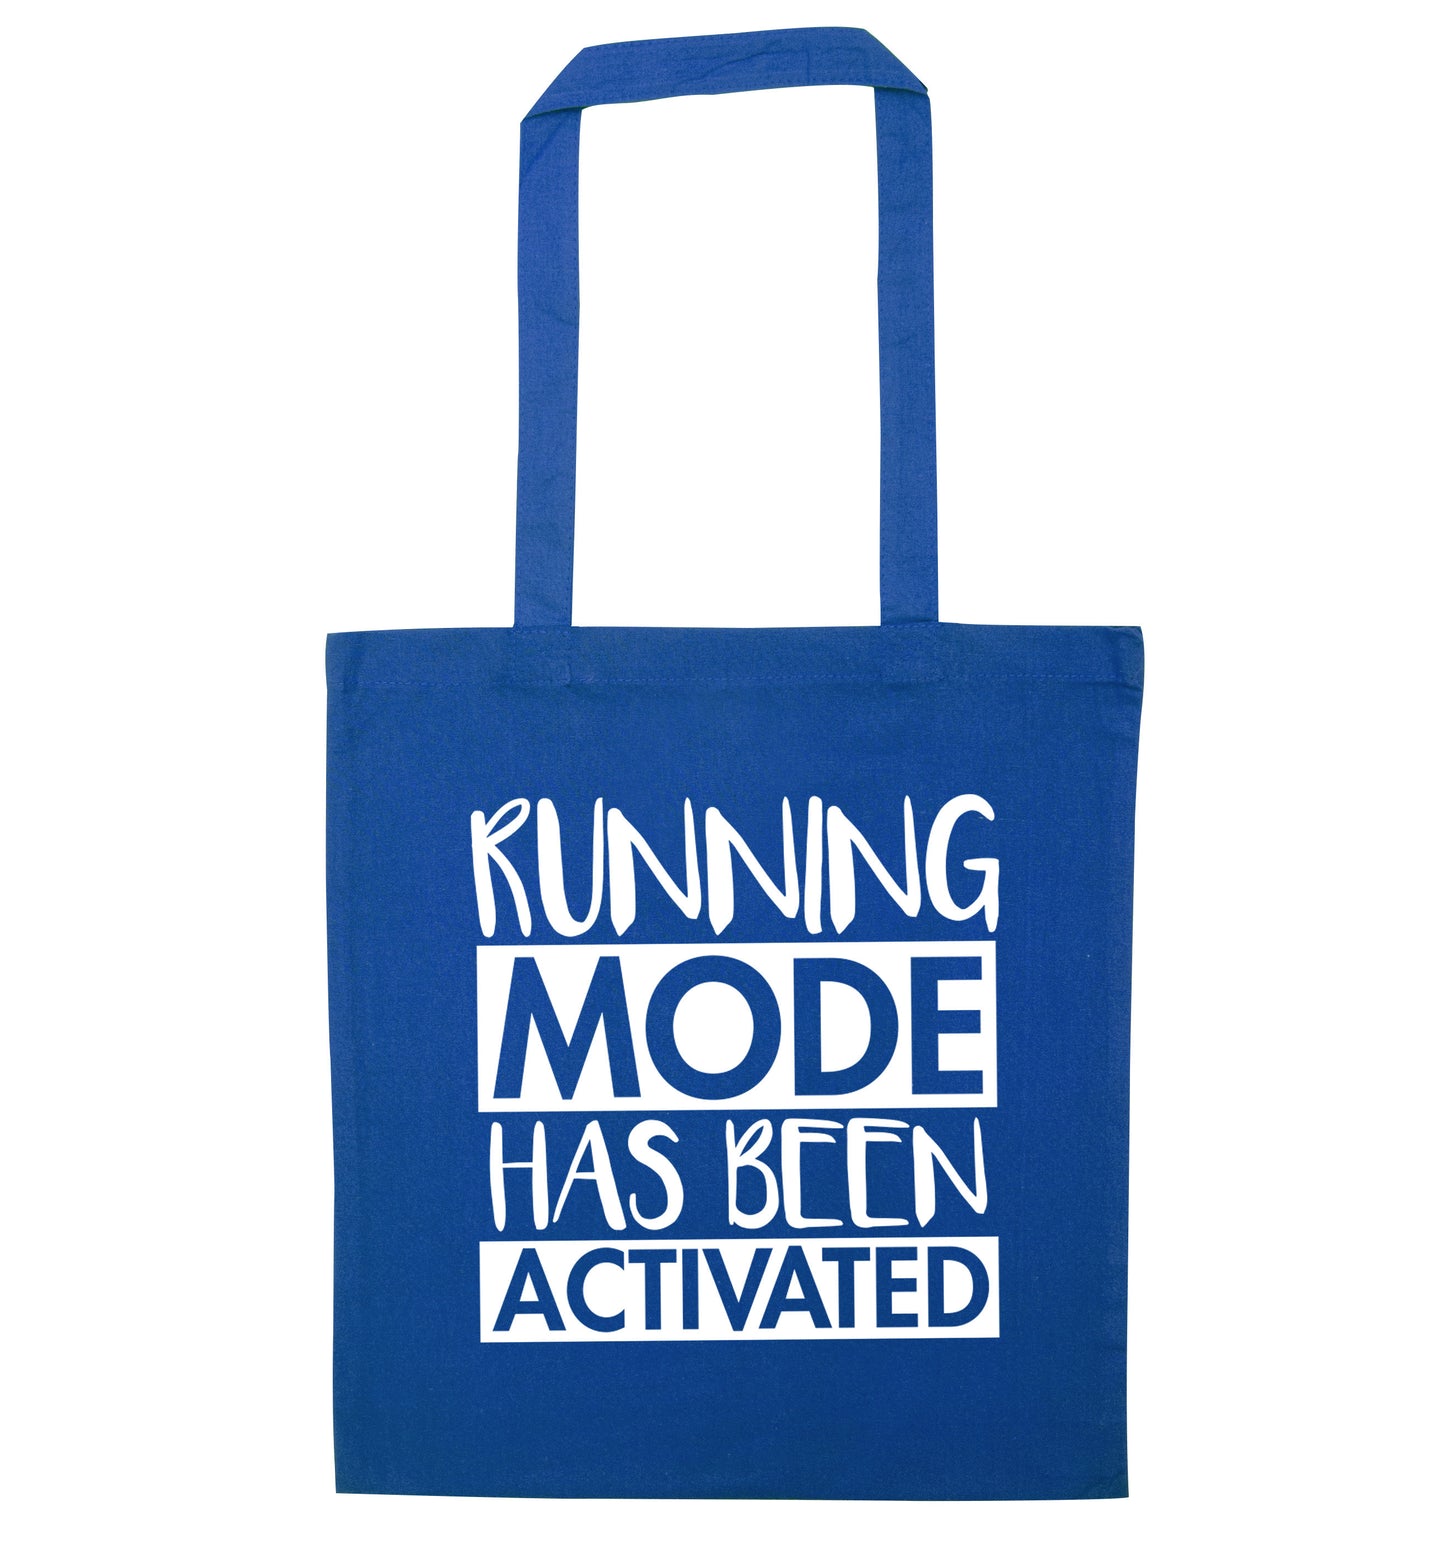 Running mode activated blue tote bag